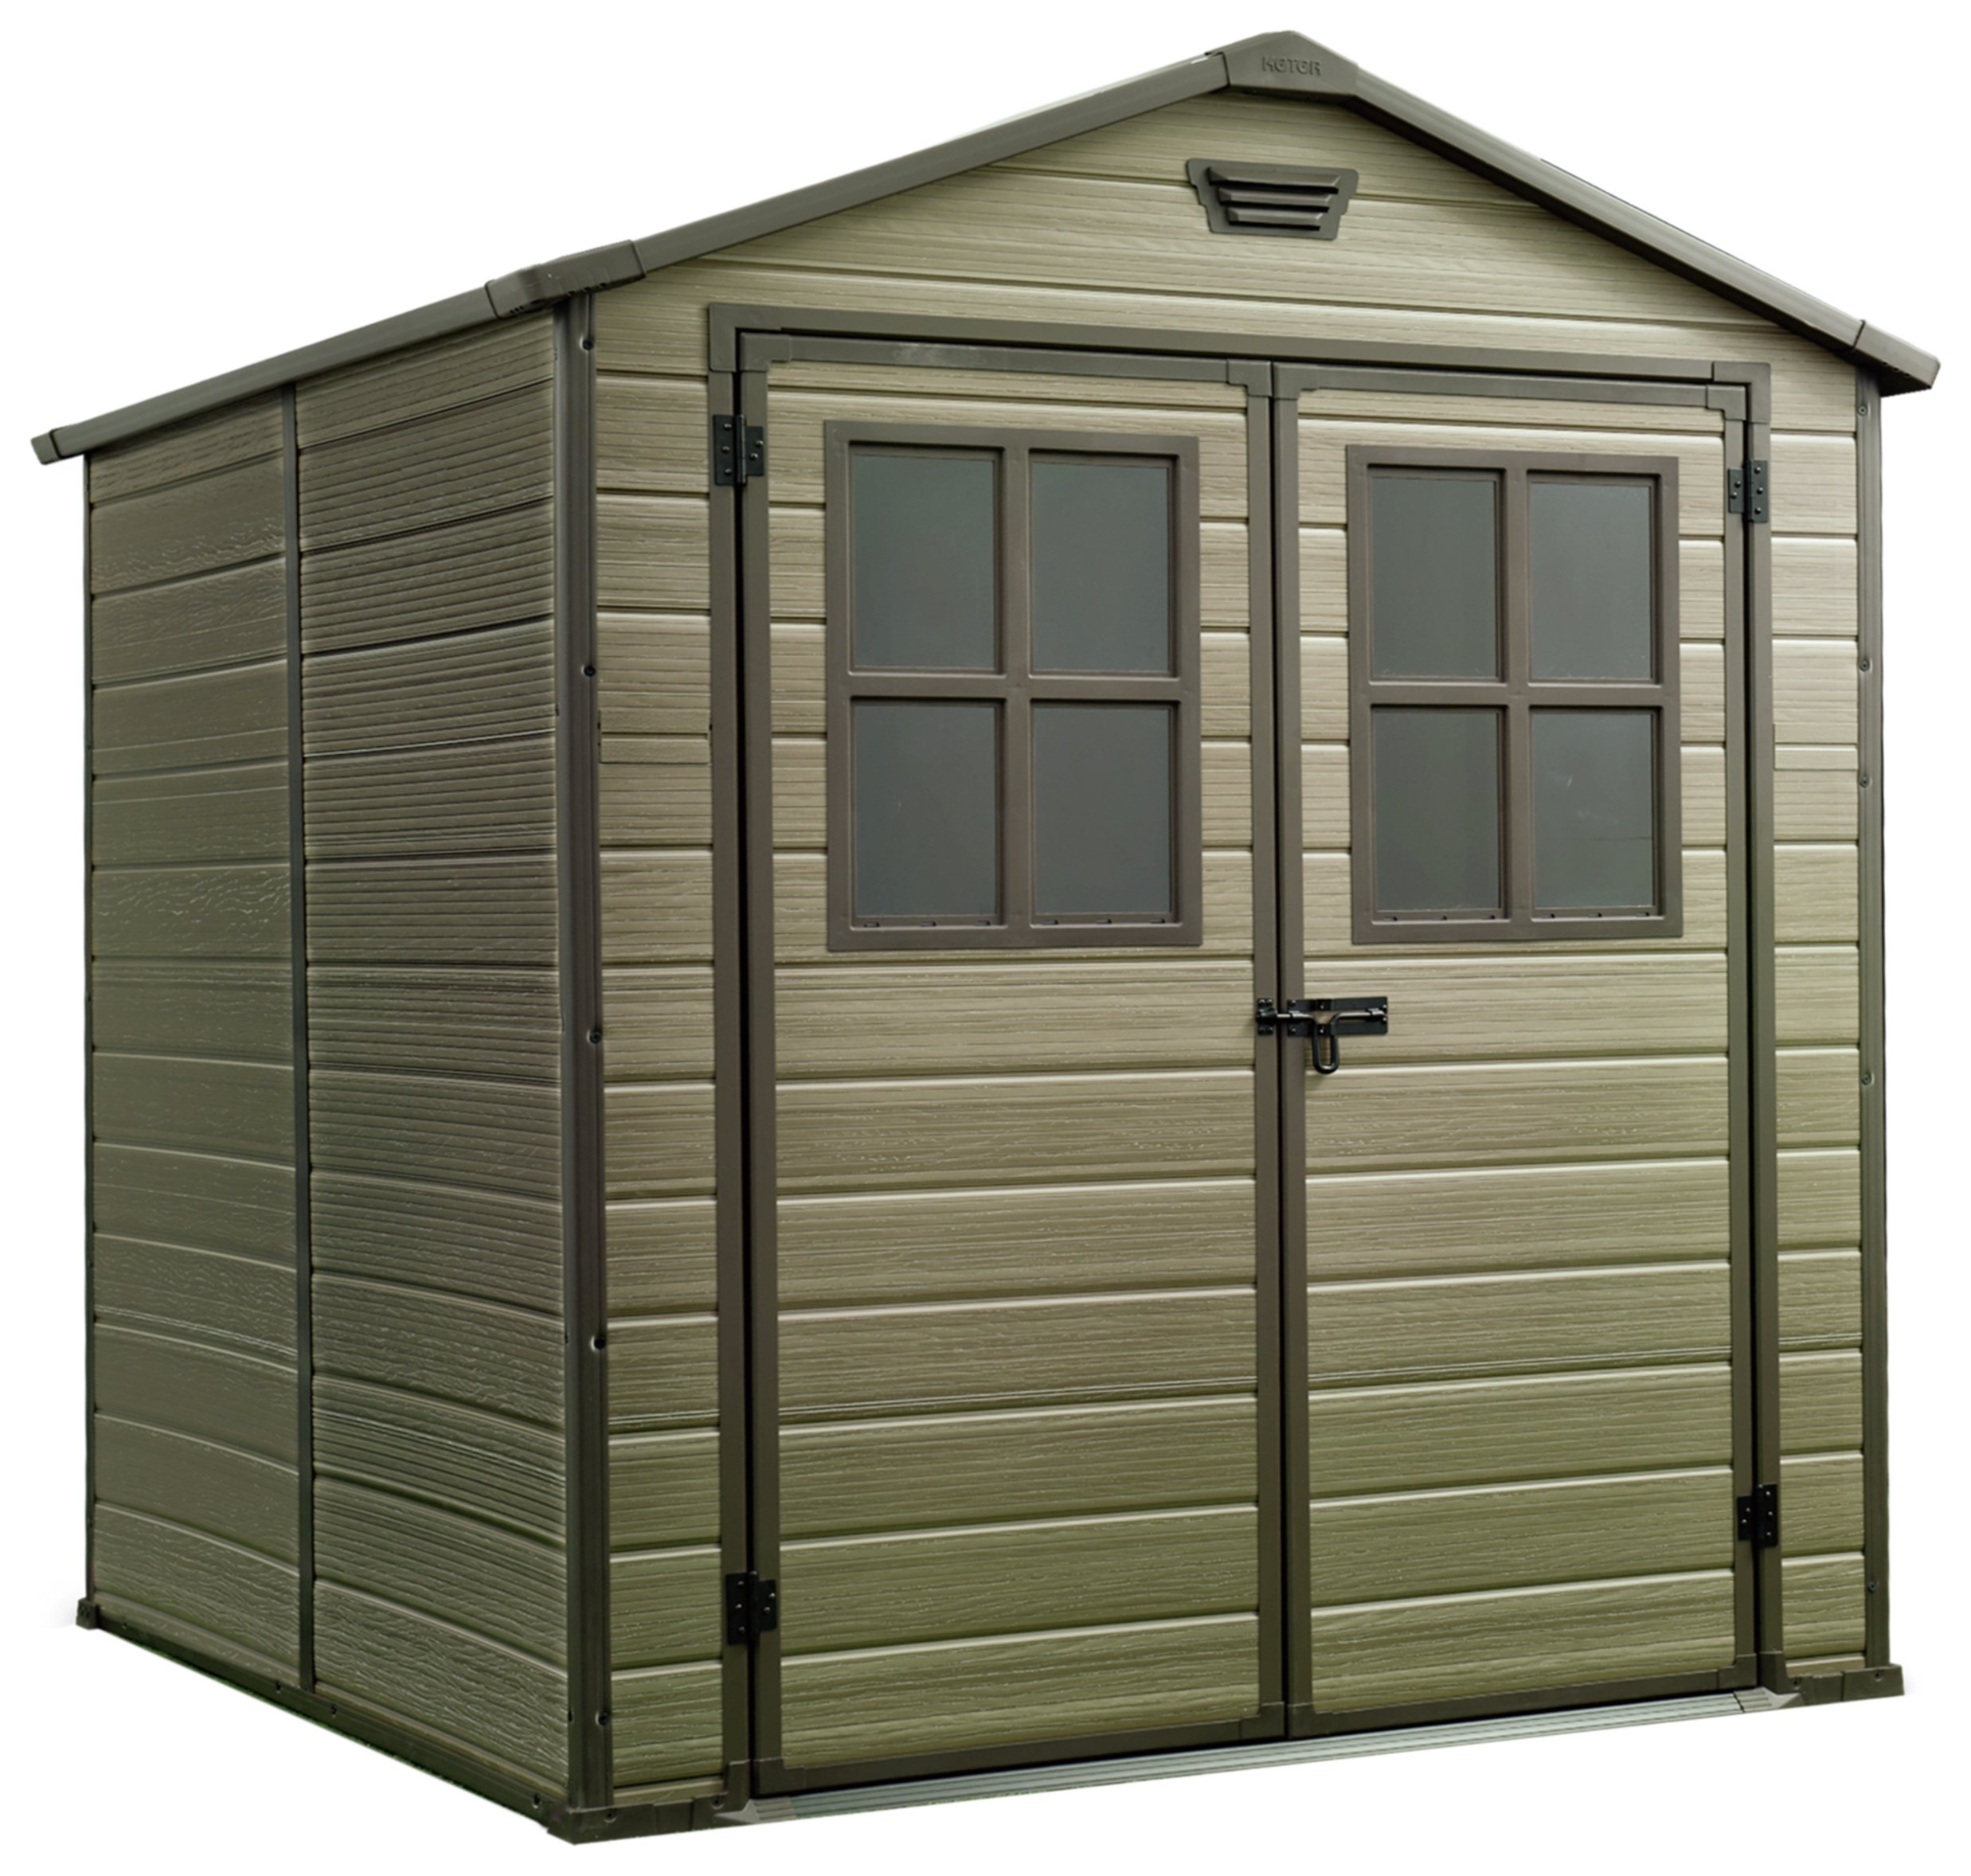 Keter Scala Plastic Garden Shed